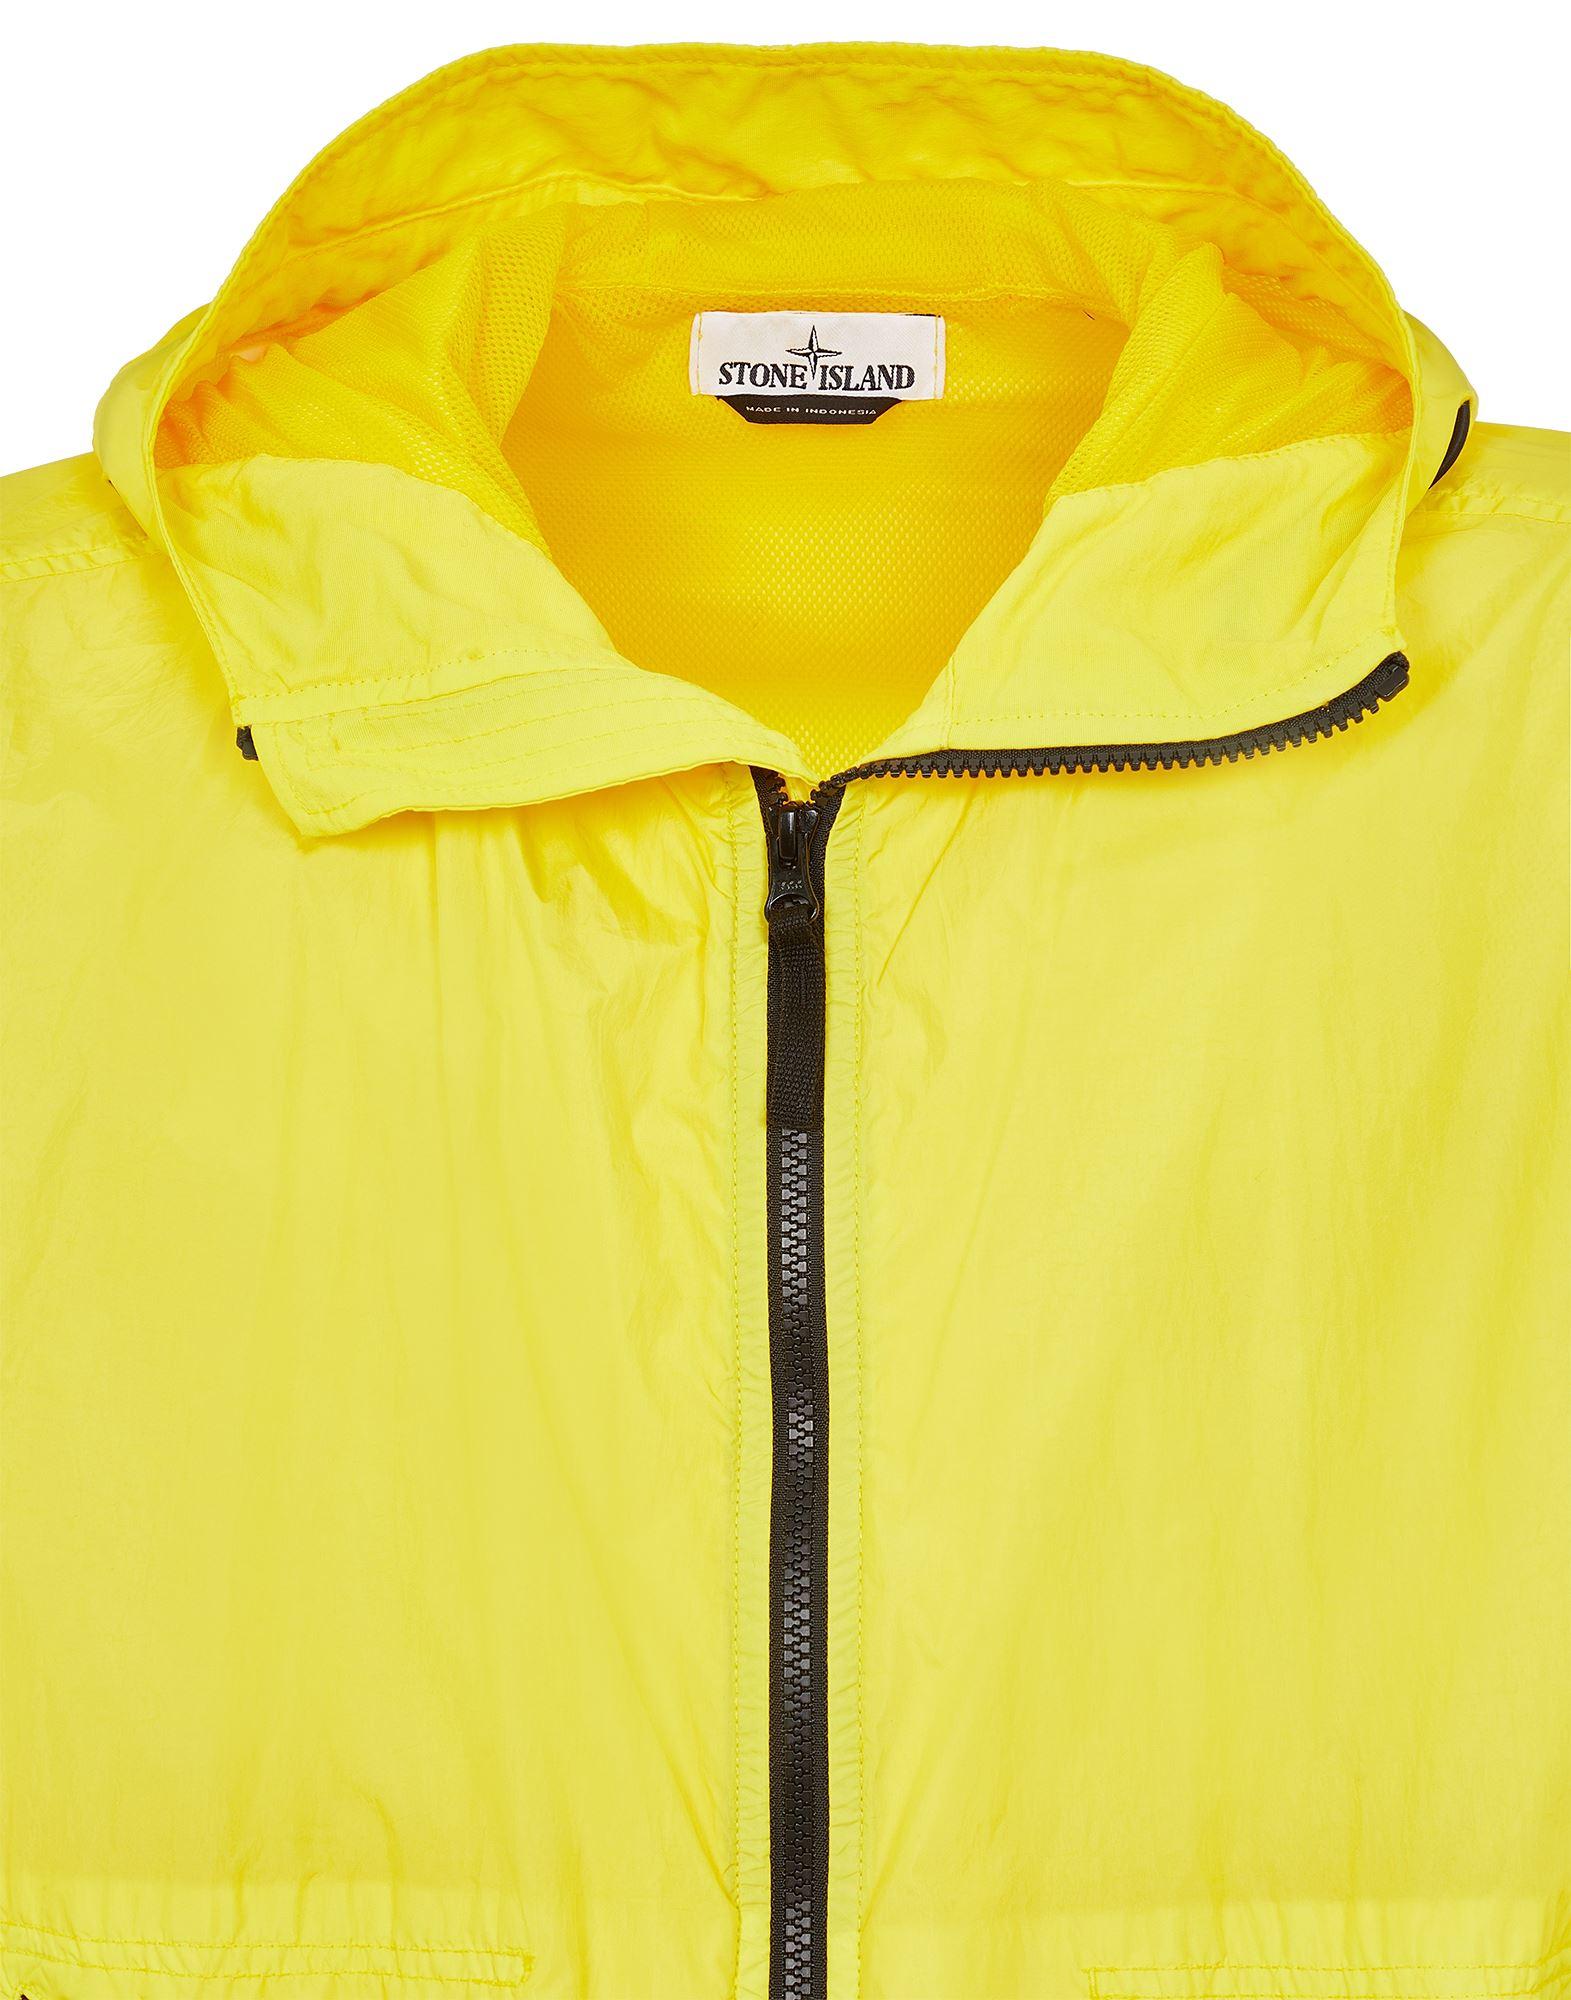 Stone Island Jacket Polyamide in Yellow for Men | Lyst